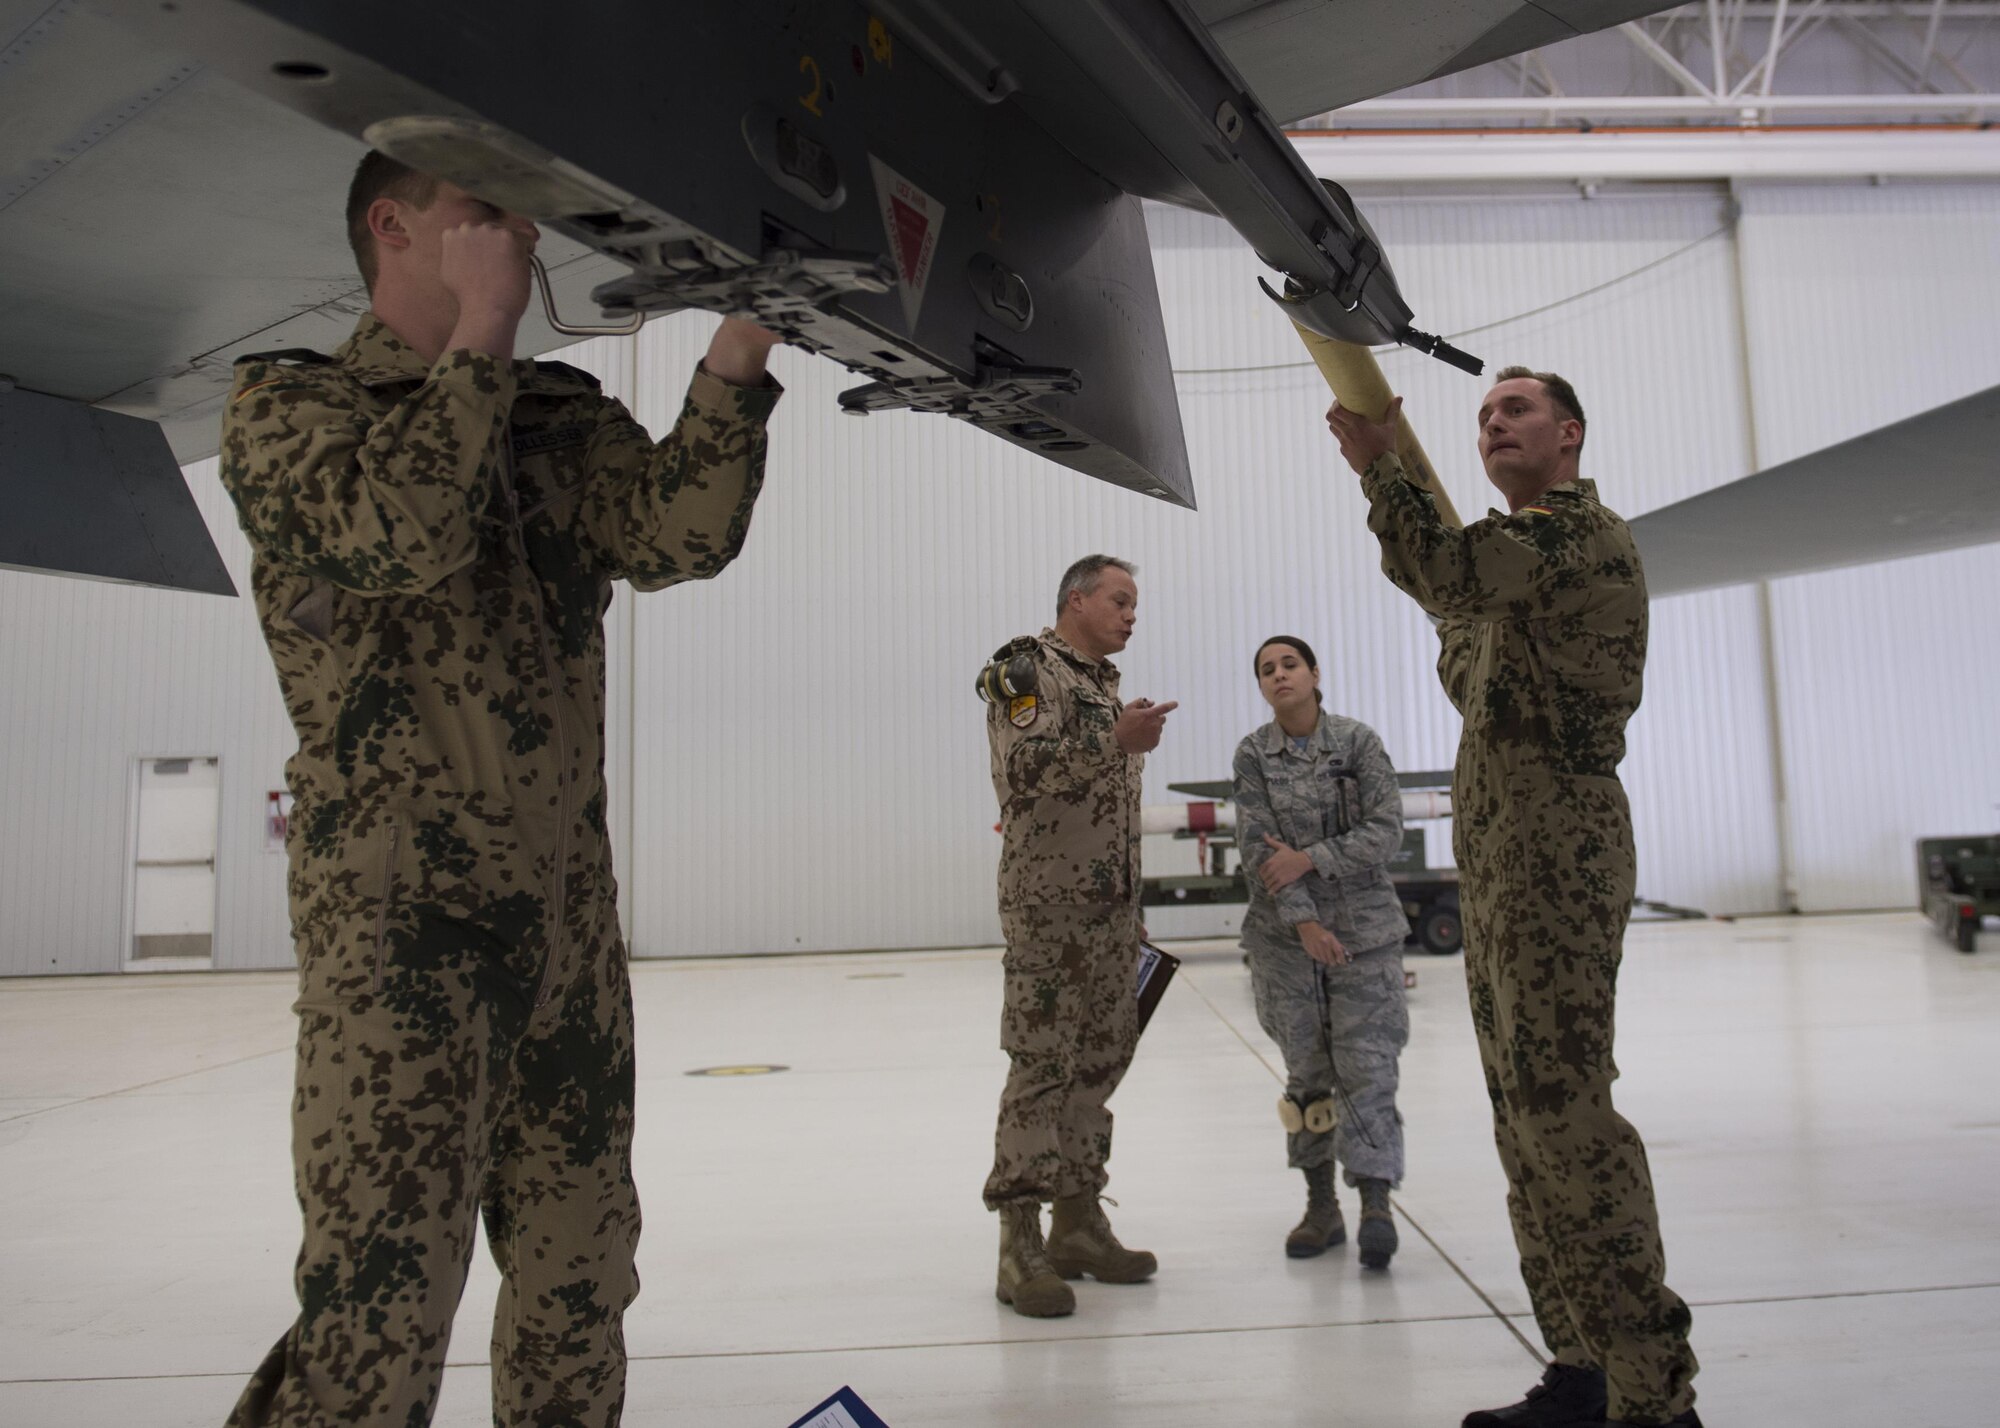 German Air Force Flying Training Center members load an inert missile onto a GAF Tornado during a quarterly load crew competition at Holloman Air Force Base, N.M., Jan. 20, 2016. The GAF competed for the last time in the load crew competition to have their skills evaluated alongside the MQ-9 Reaper, and the F-16 Fighting Falcon load crews. Points for the competition are awarded based on weapons loading, tool kit inspection and uniform inspection categories. (U.S. Air Force photo by Senior Airman Chase Cannon/ Released)